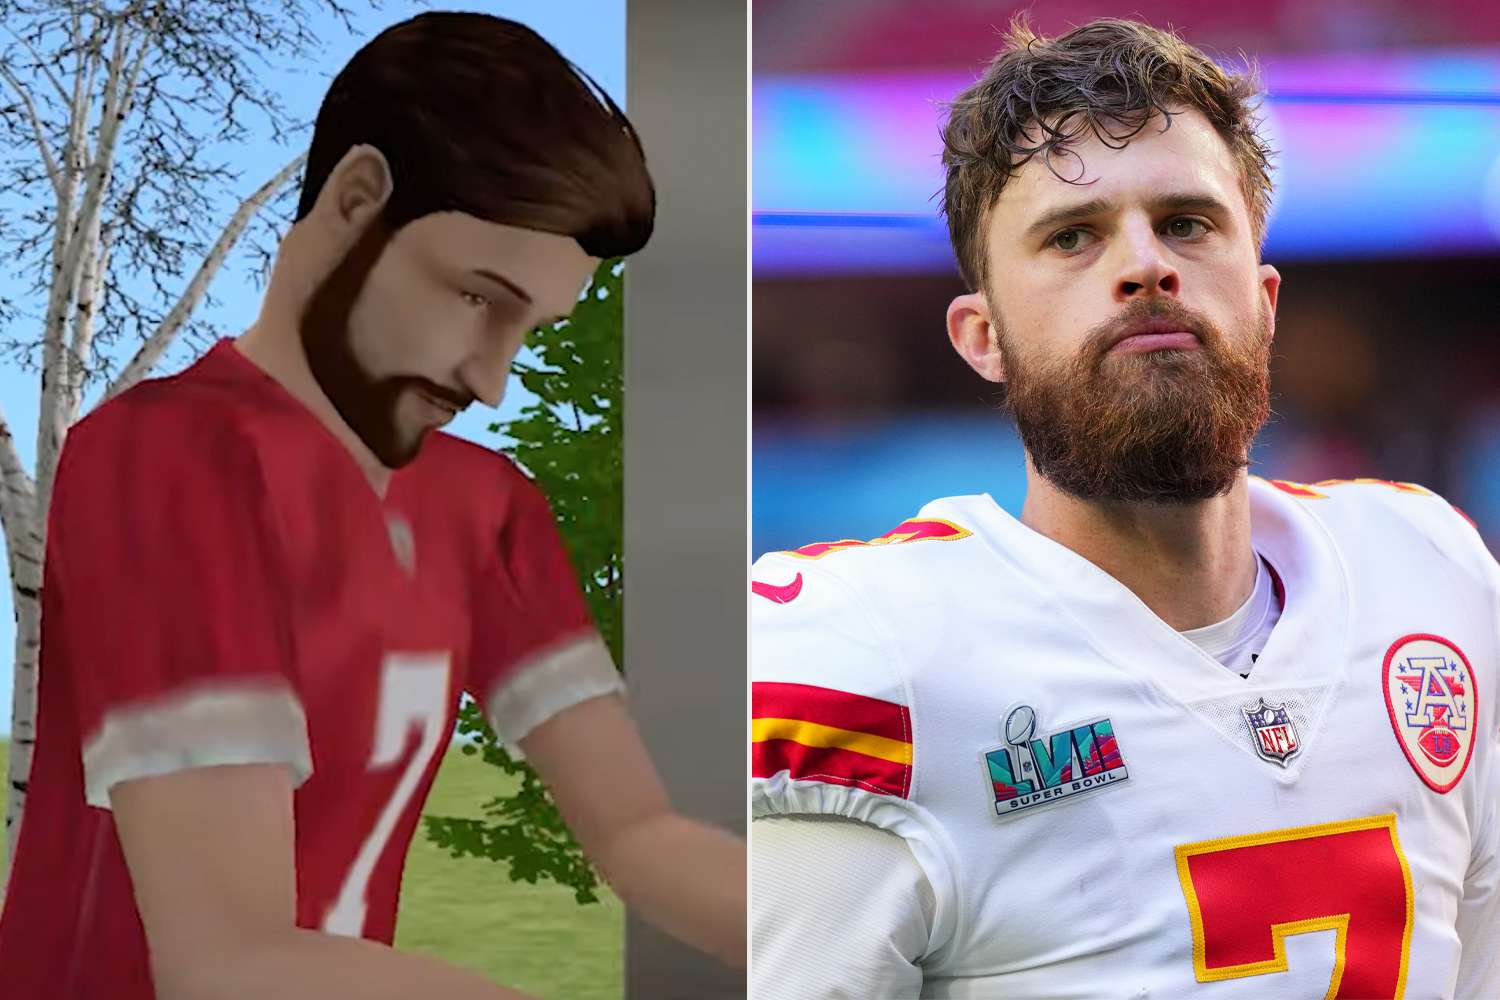 Chargers Mock Chiefs’ Harrison Butker in Schedule Release Video and Make Him a ‘Homemaker’: Watch